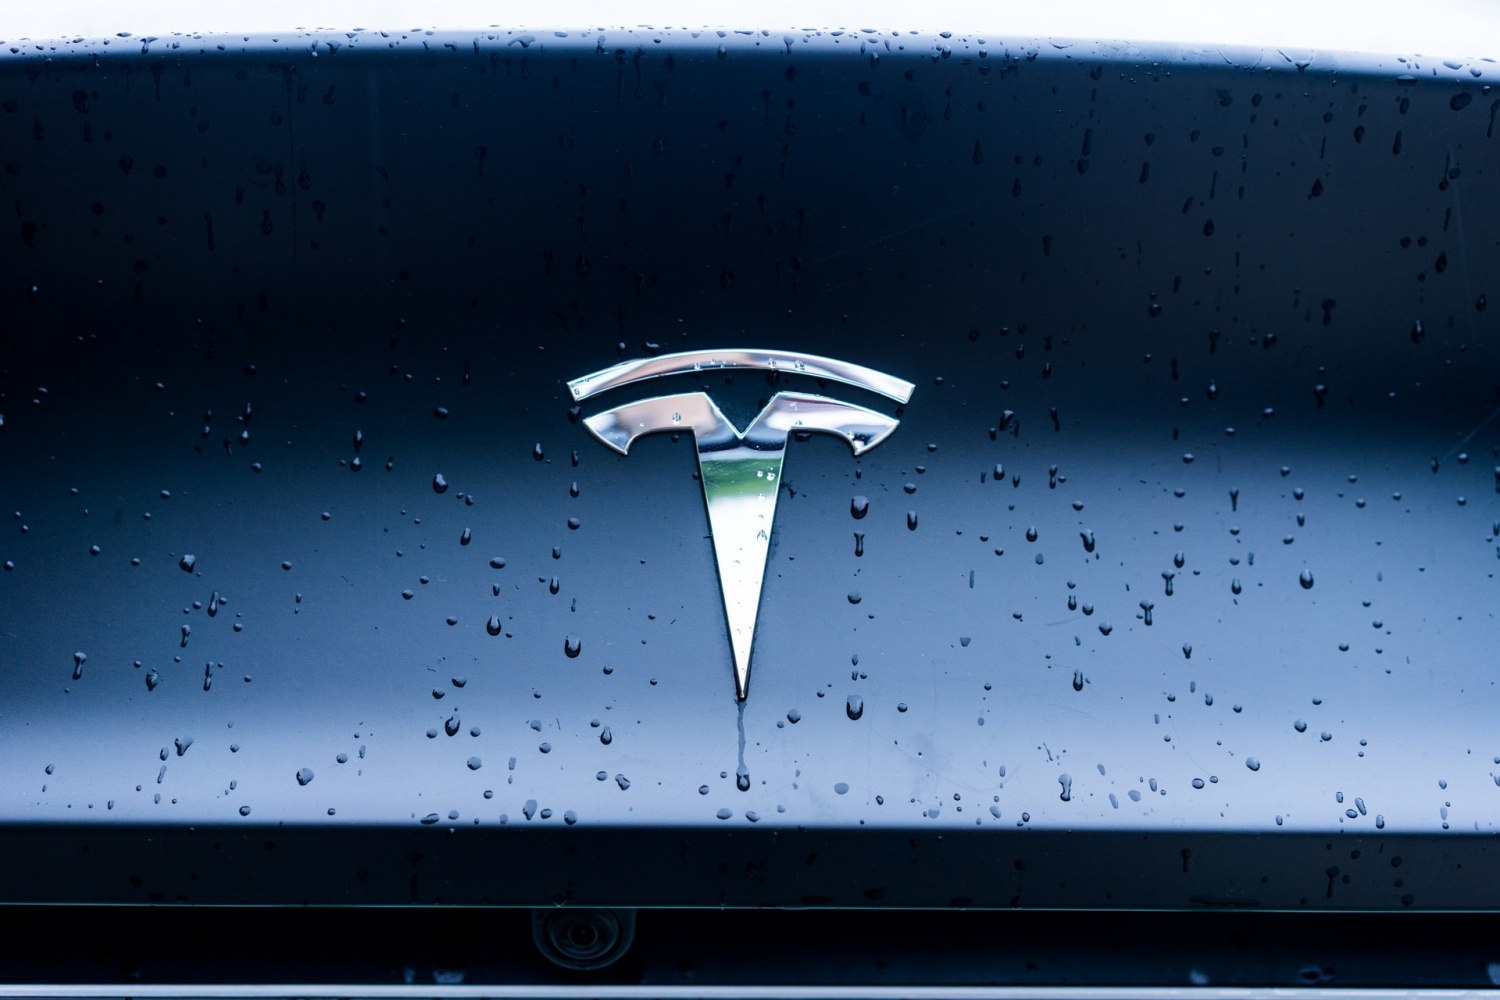 Tesla Stock Price Getting a Boost? Elon Musk Tweet Hints New Revenue Stream Through Superchargers!